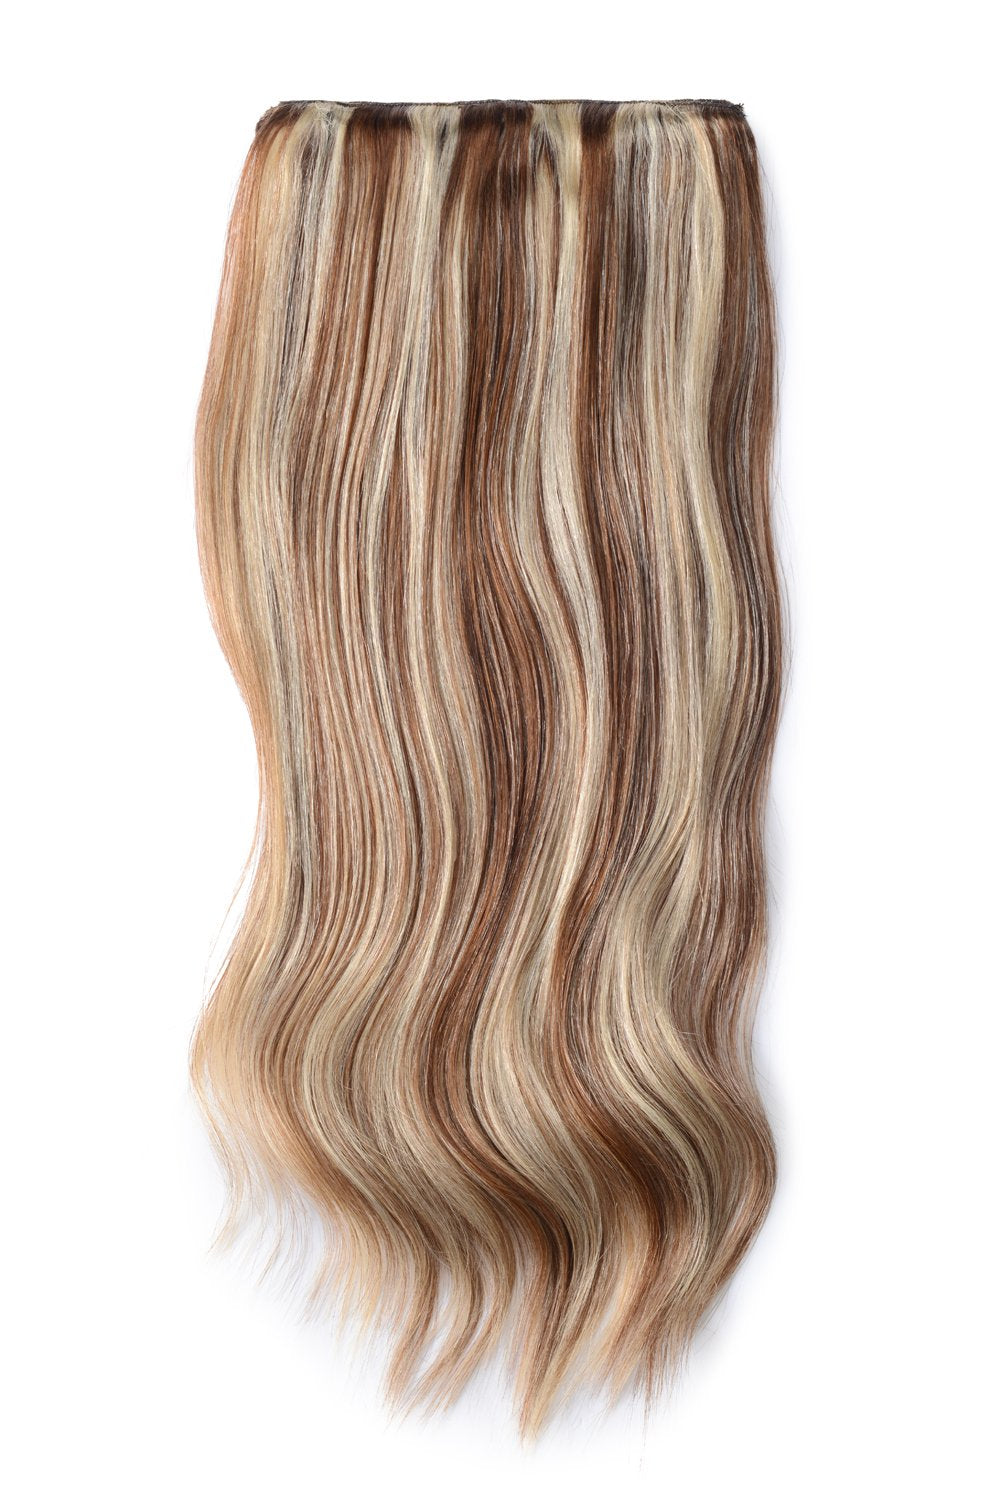 Double Wefted Full Head Remy Clip in Human Hair Extensions - Light Brown/Bleach Blonde Mix (#6/613)